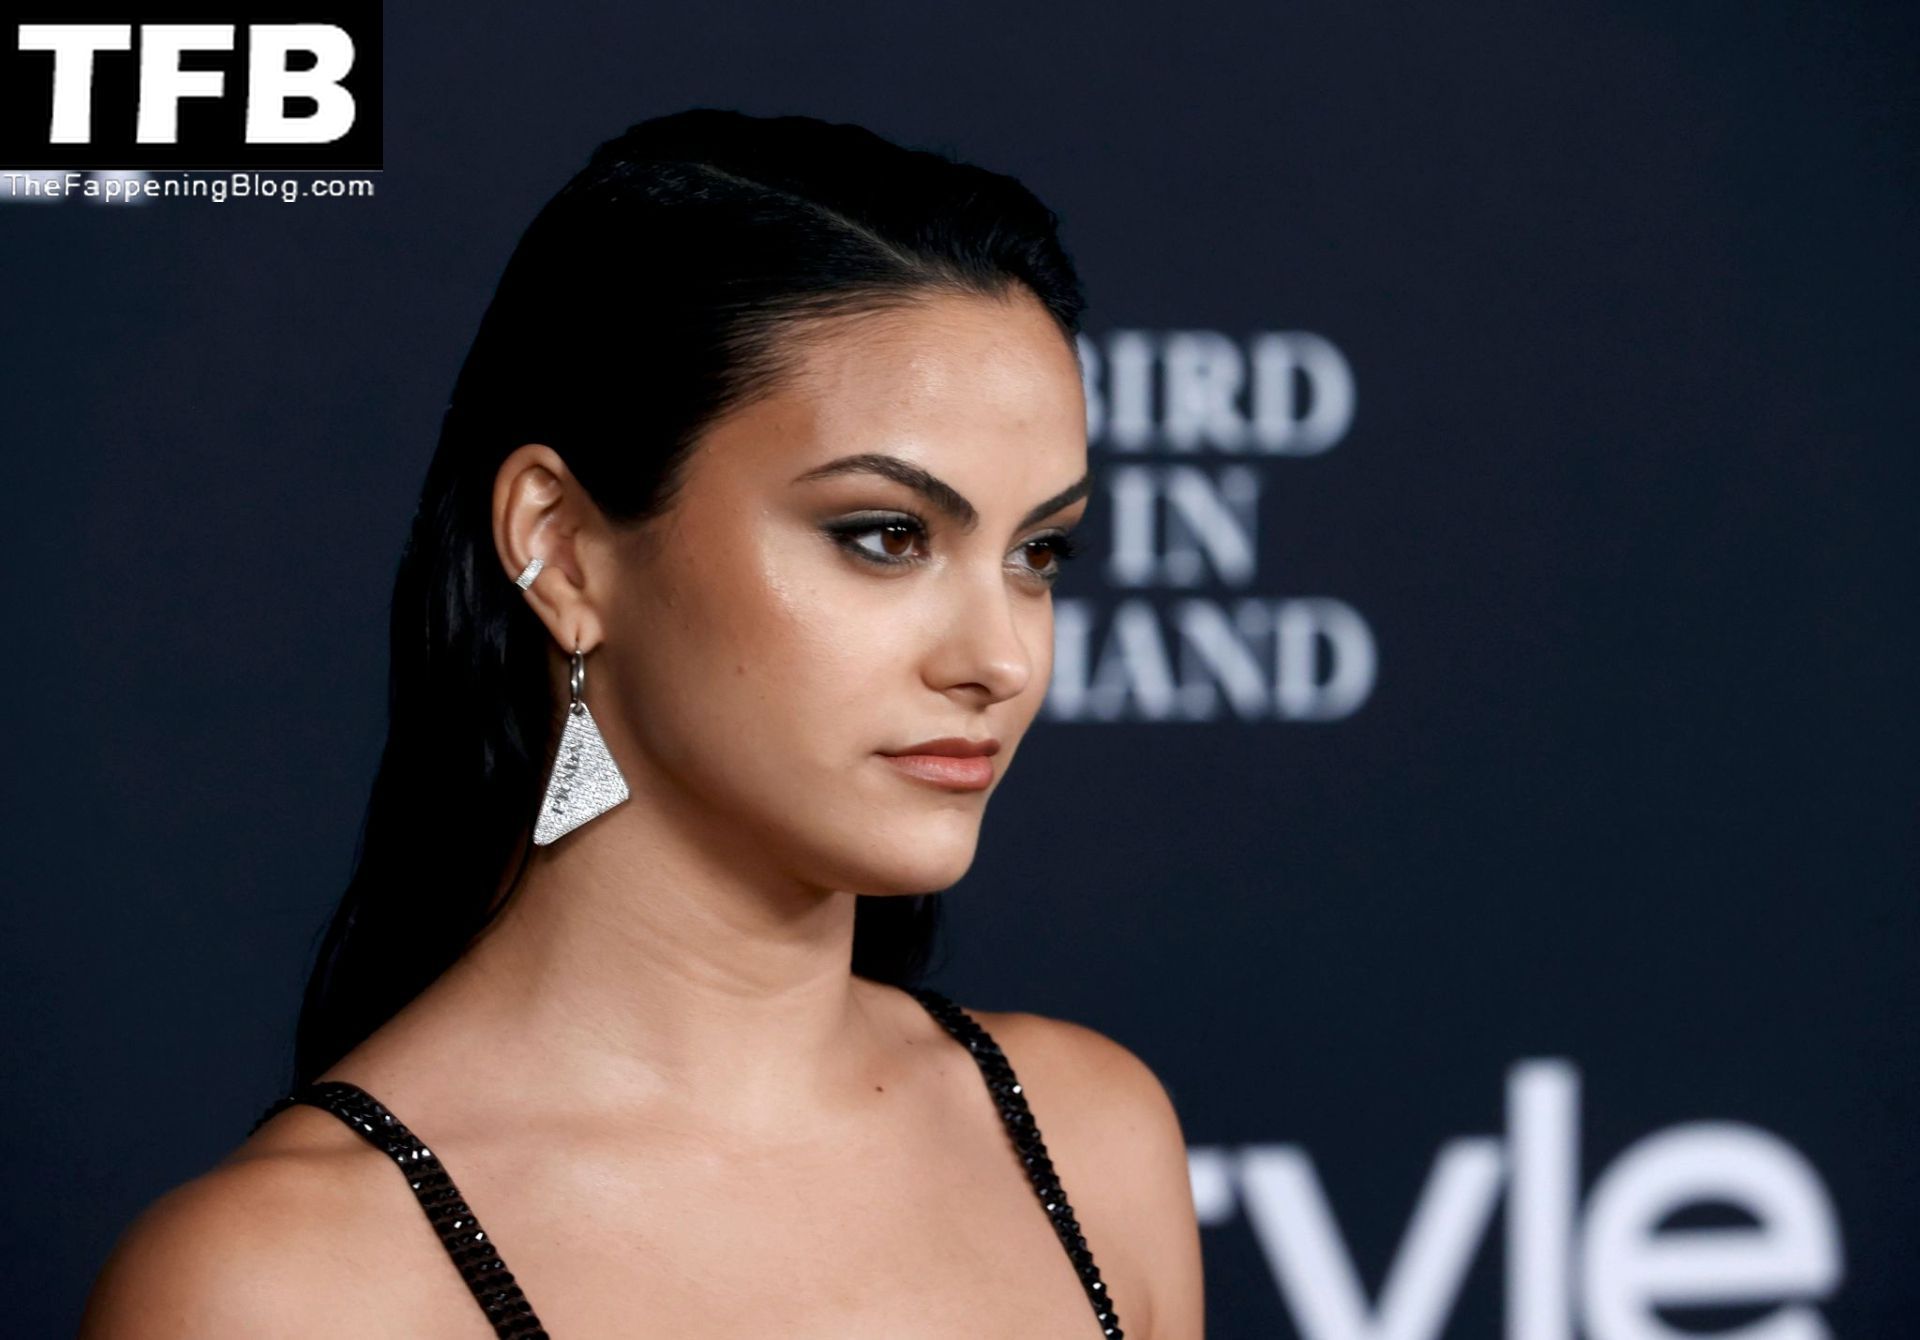 Camila-Mendes-See-Through-Tits-The-Fappening-Blog-36.jpg